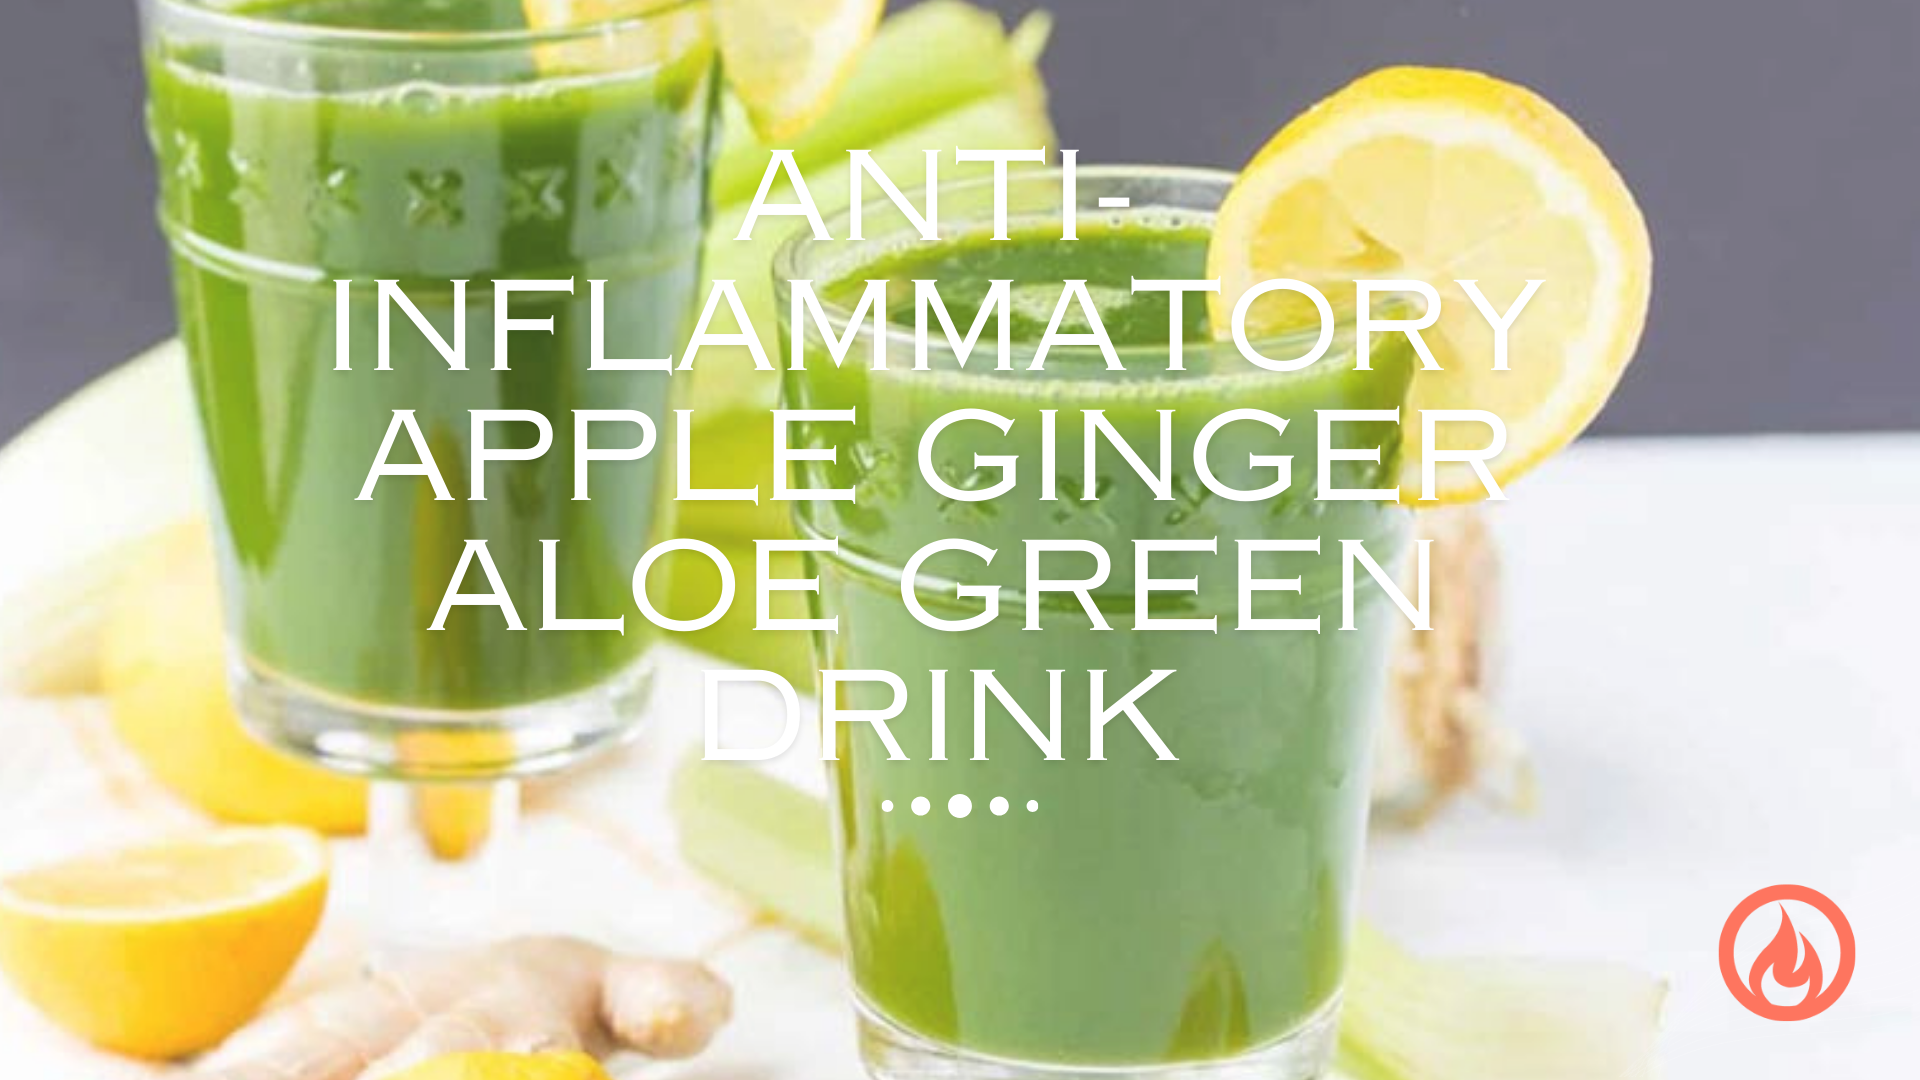 Feeling Bloated? This Green Drink Will Help!